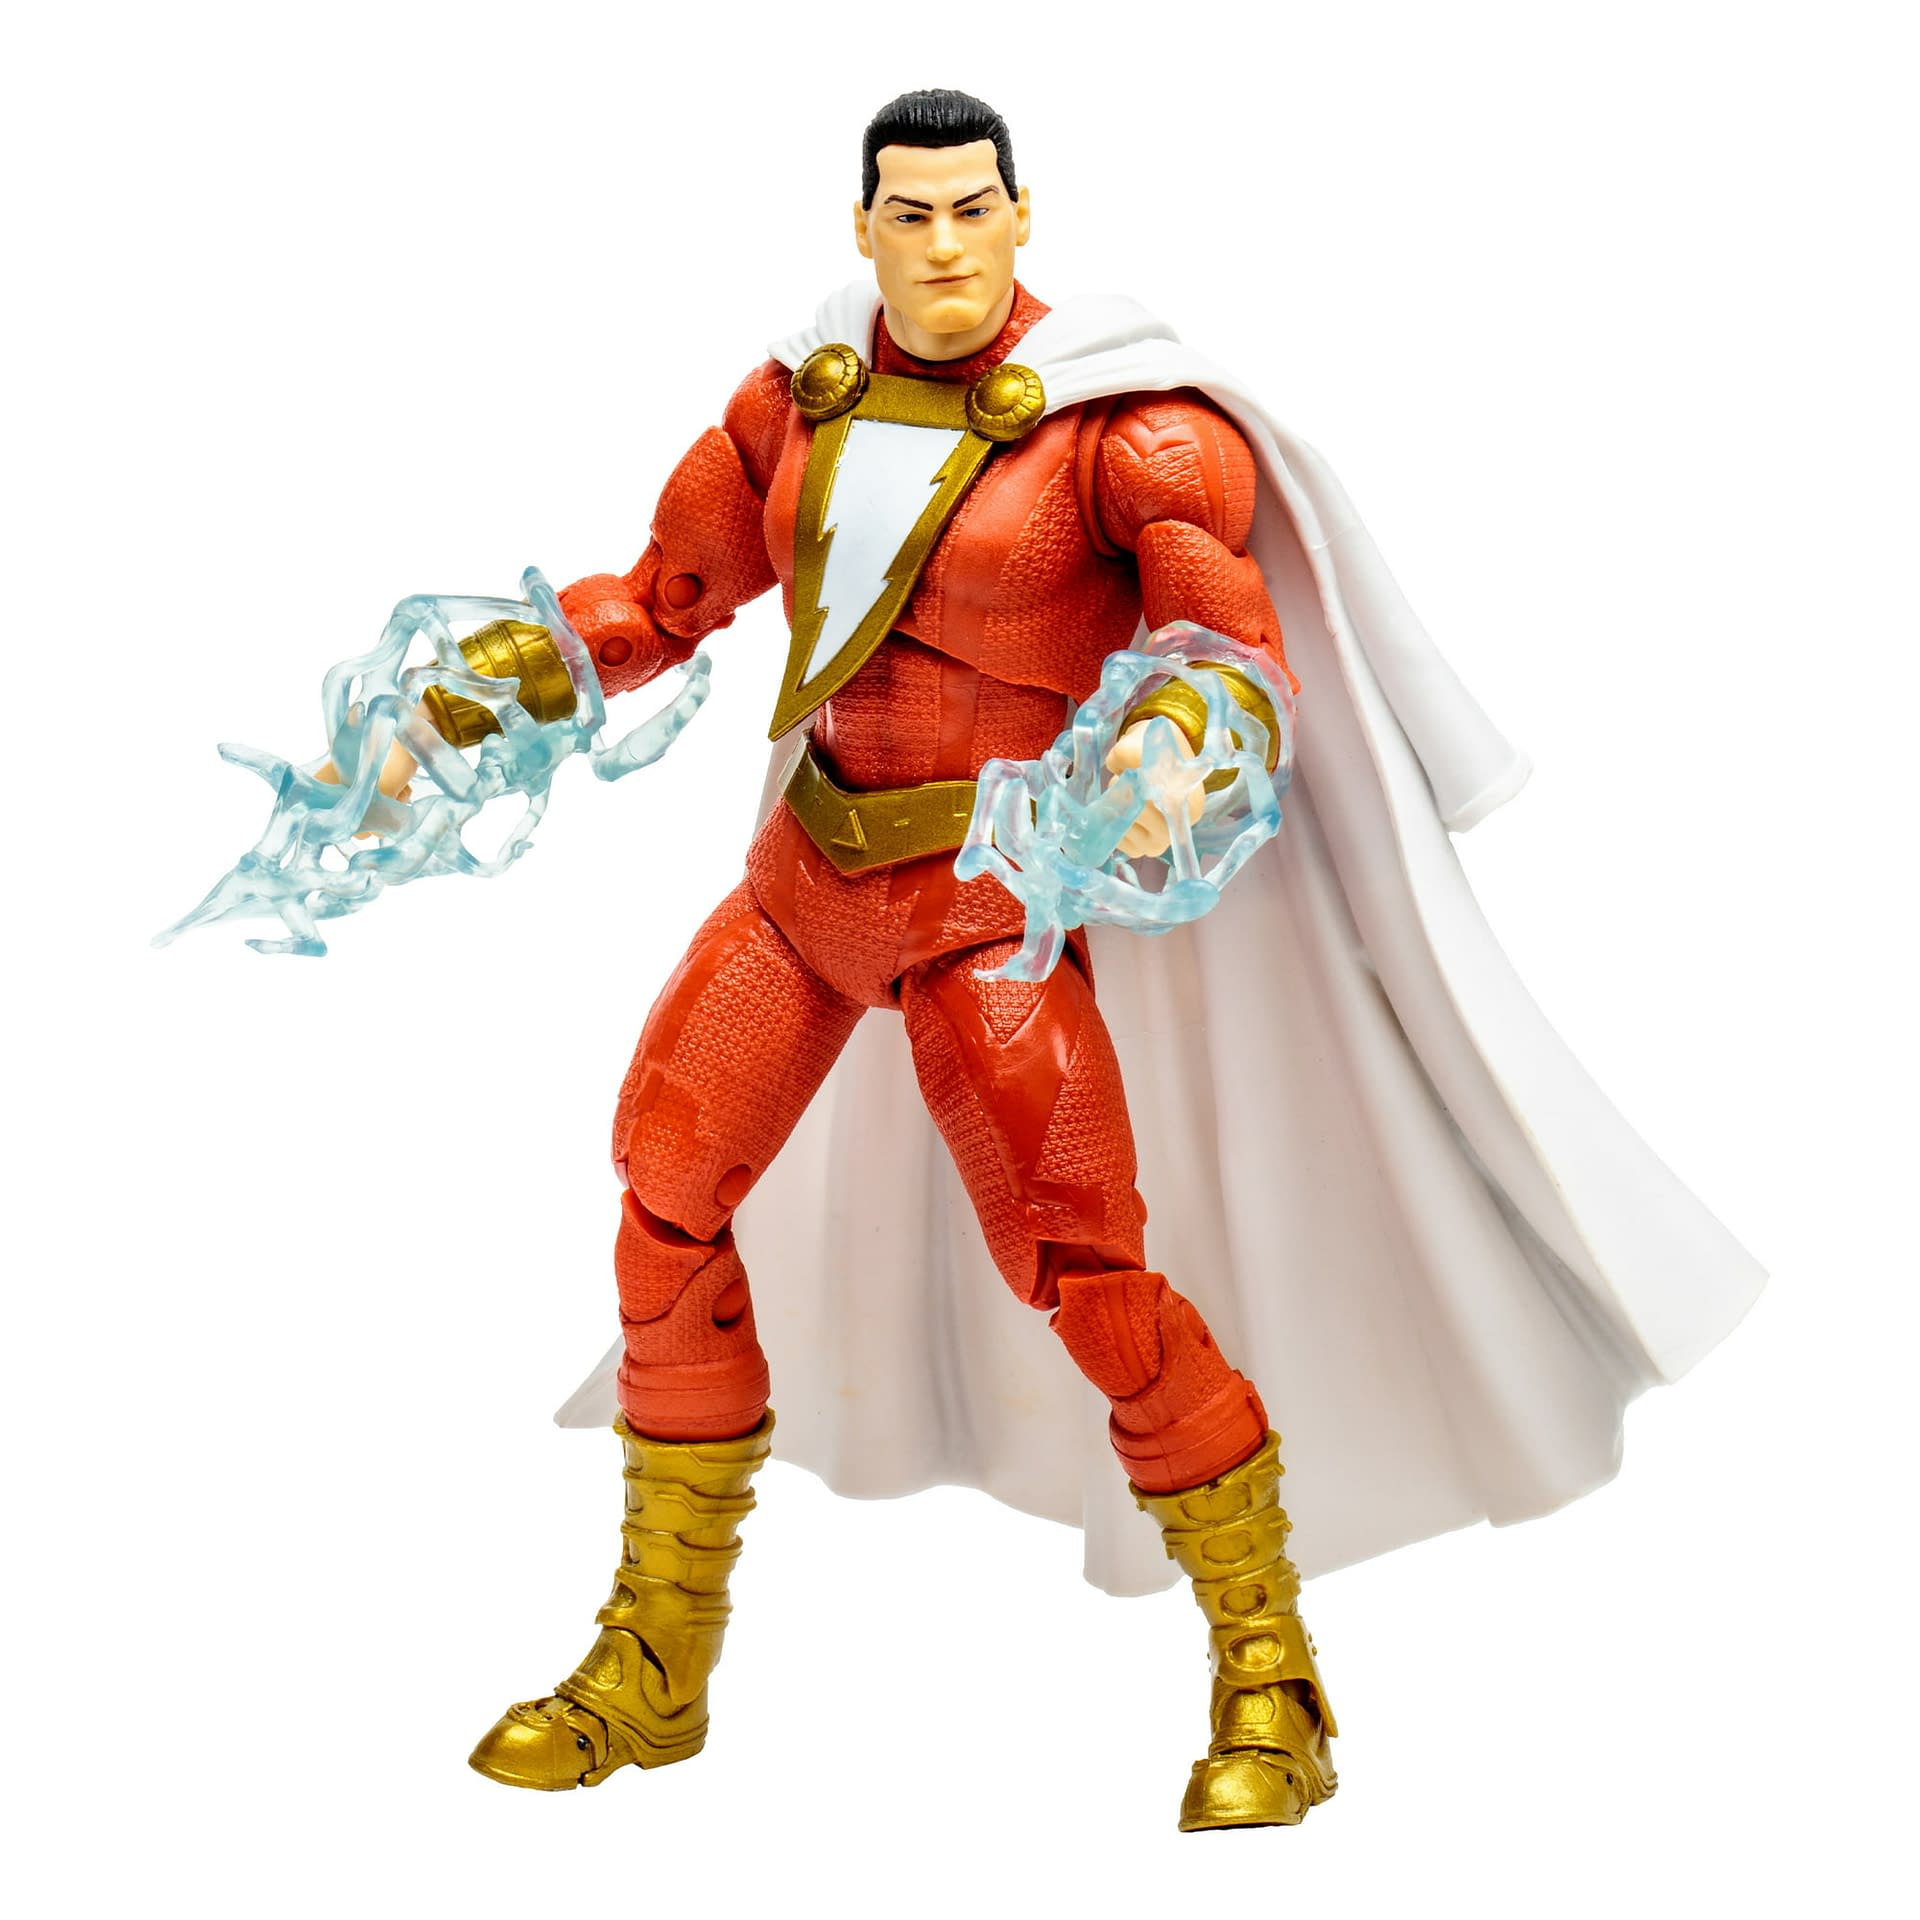 The Power of DC Comics Shazam Arrives from McFarlane Toys